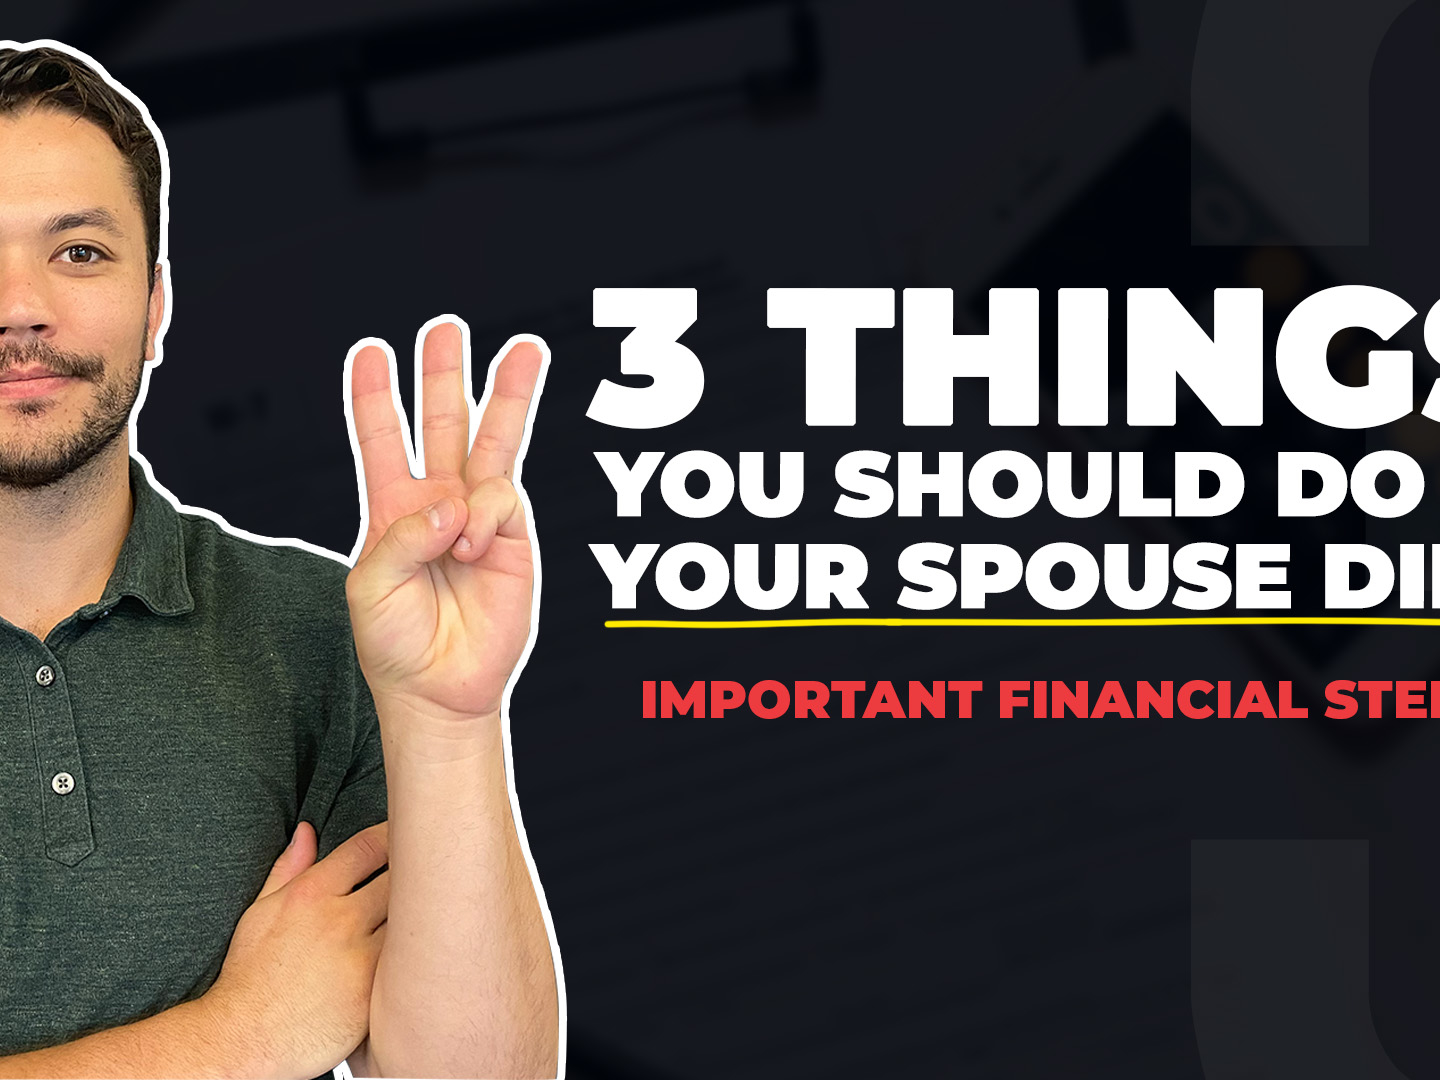 Financial Things to Do When Your Spouse Dies